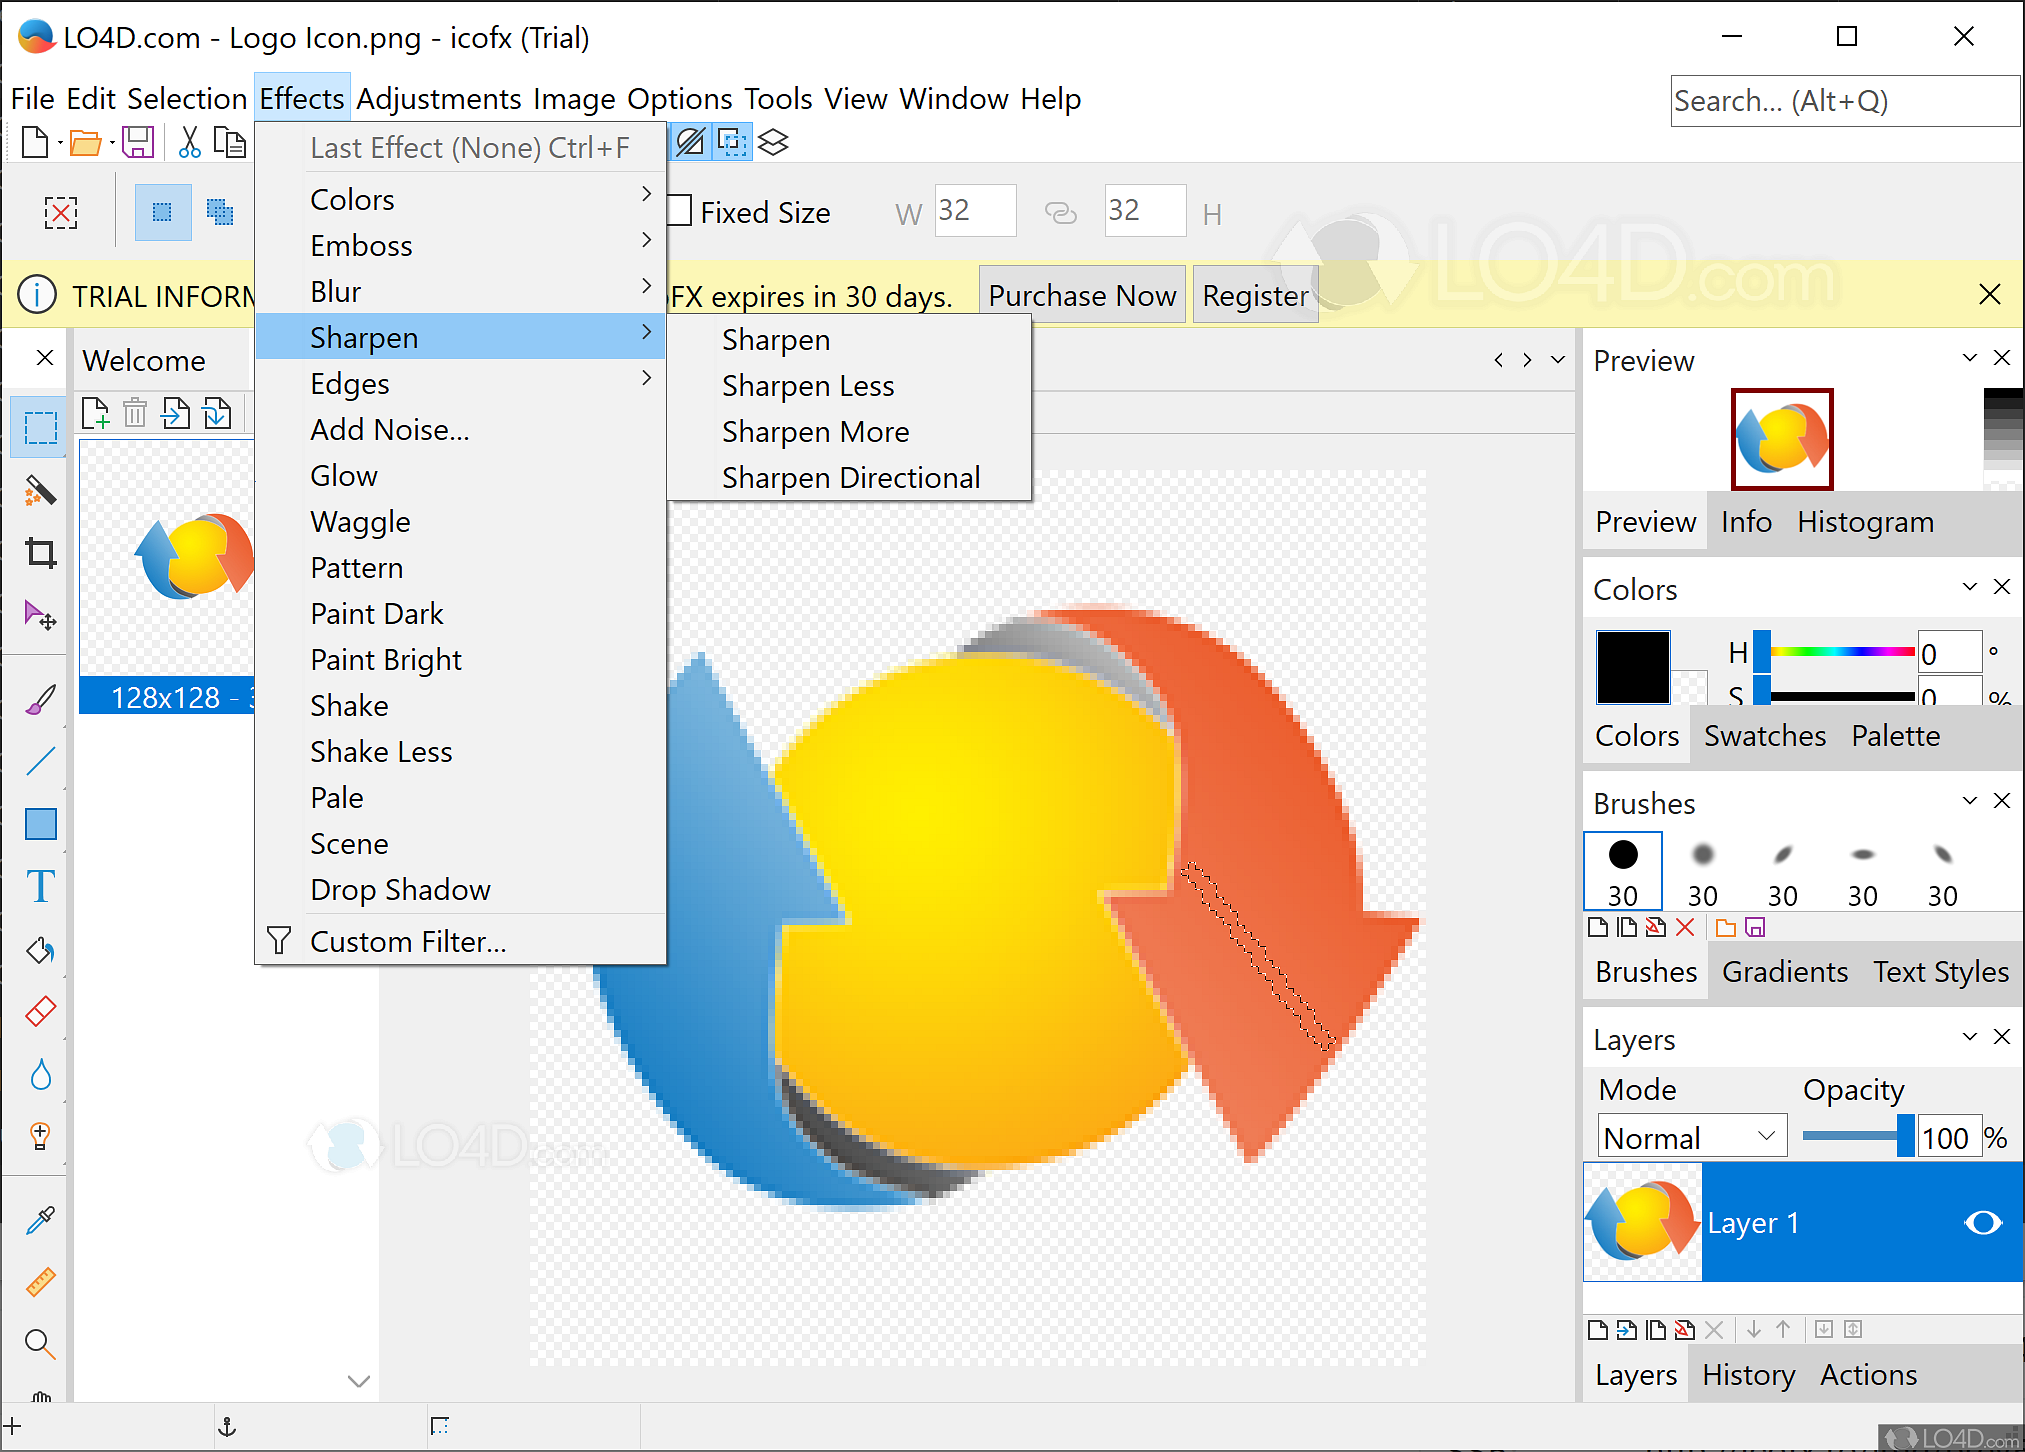 download the last version for windows Chasys Draw IES 5.27.02